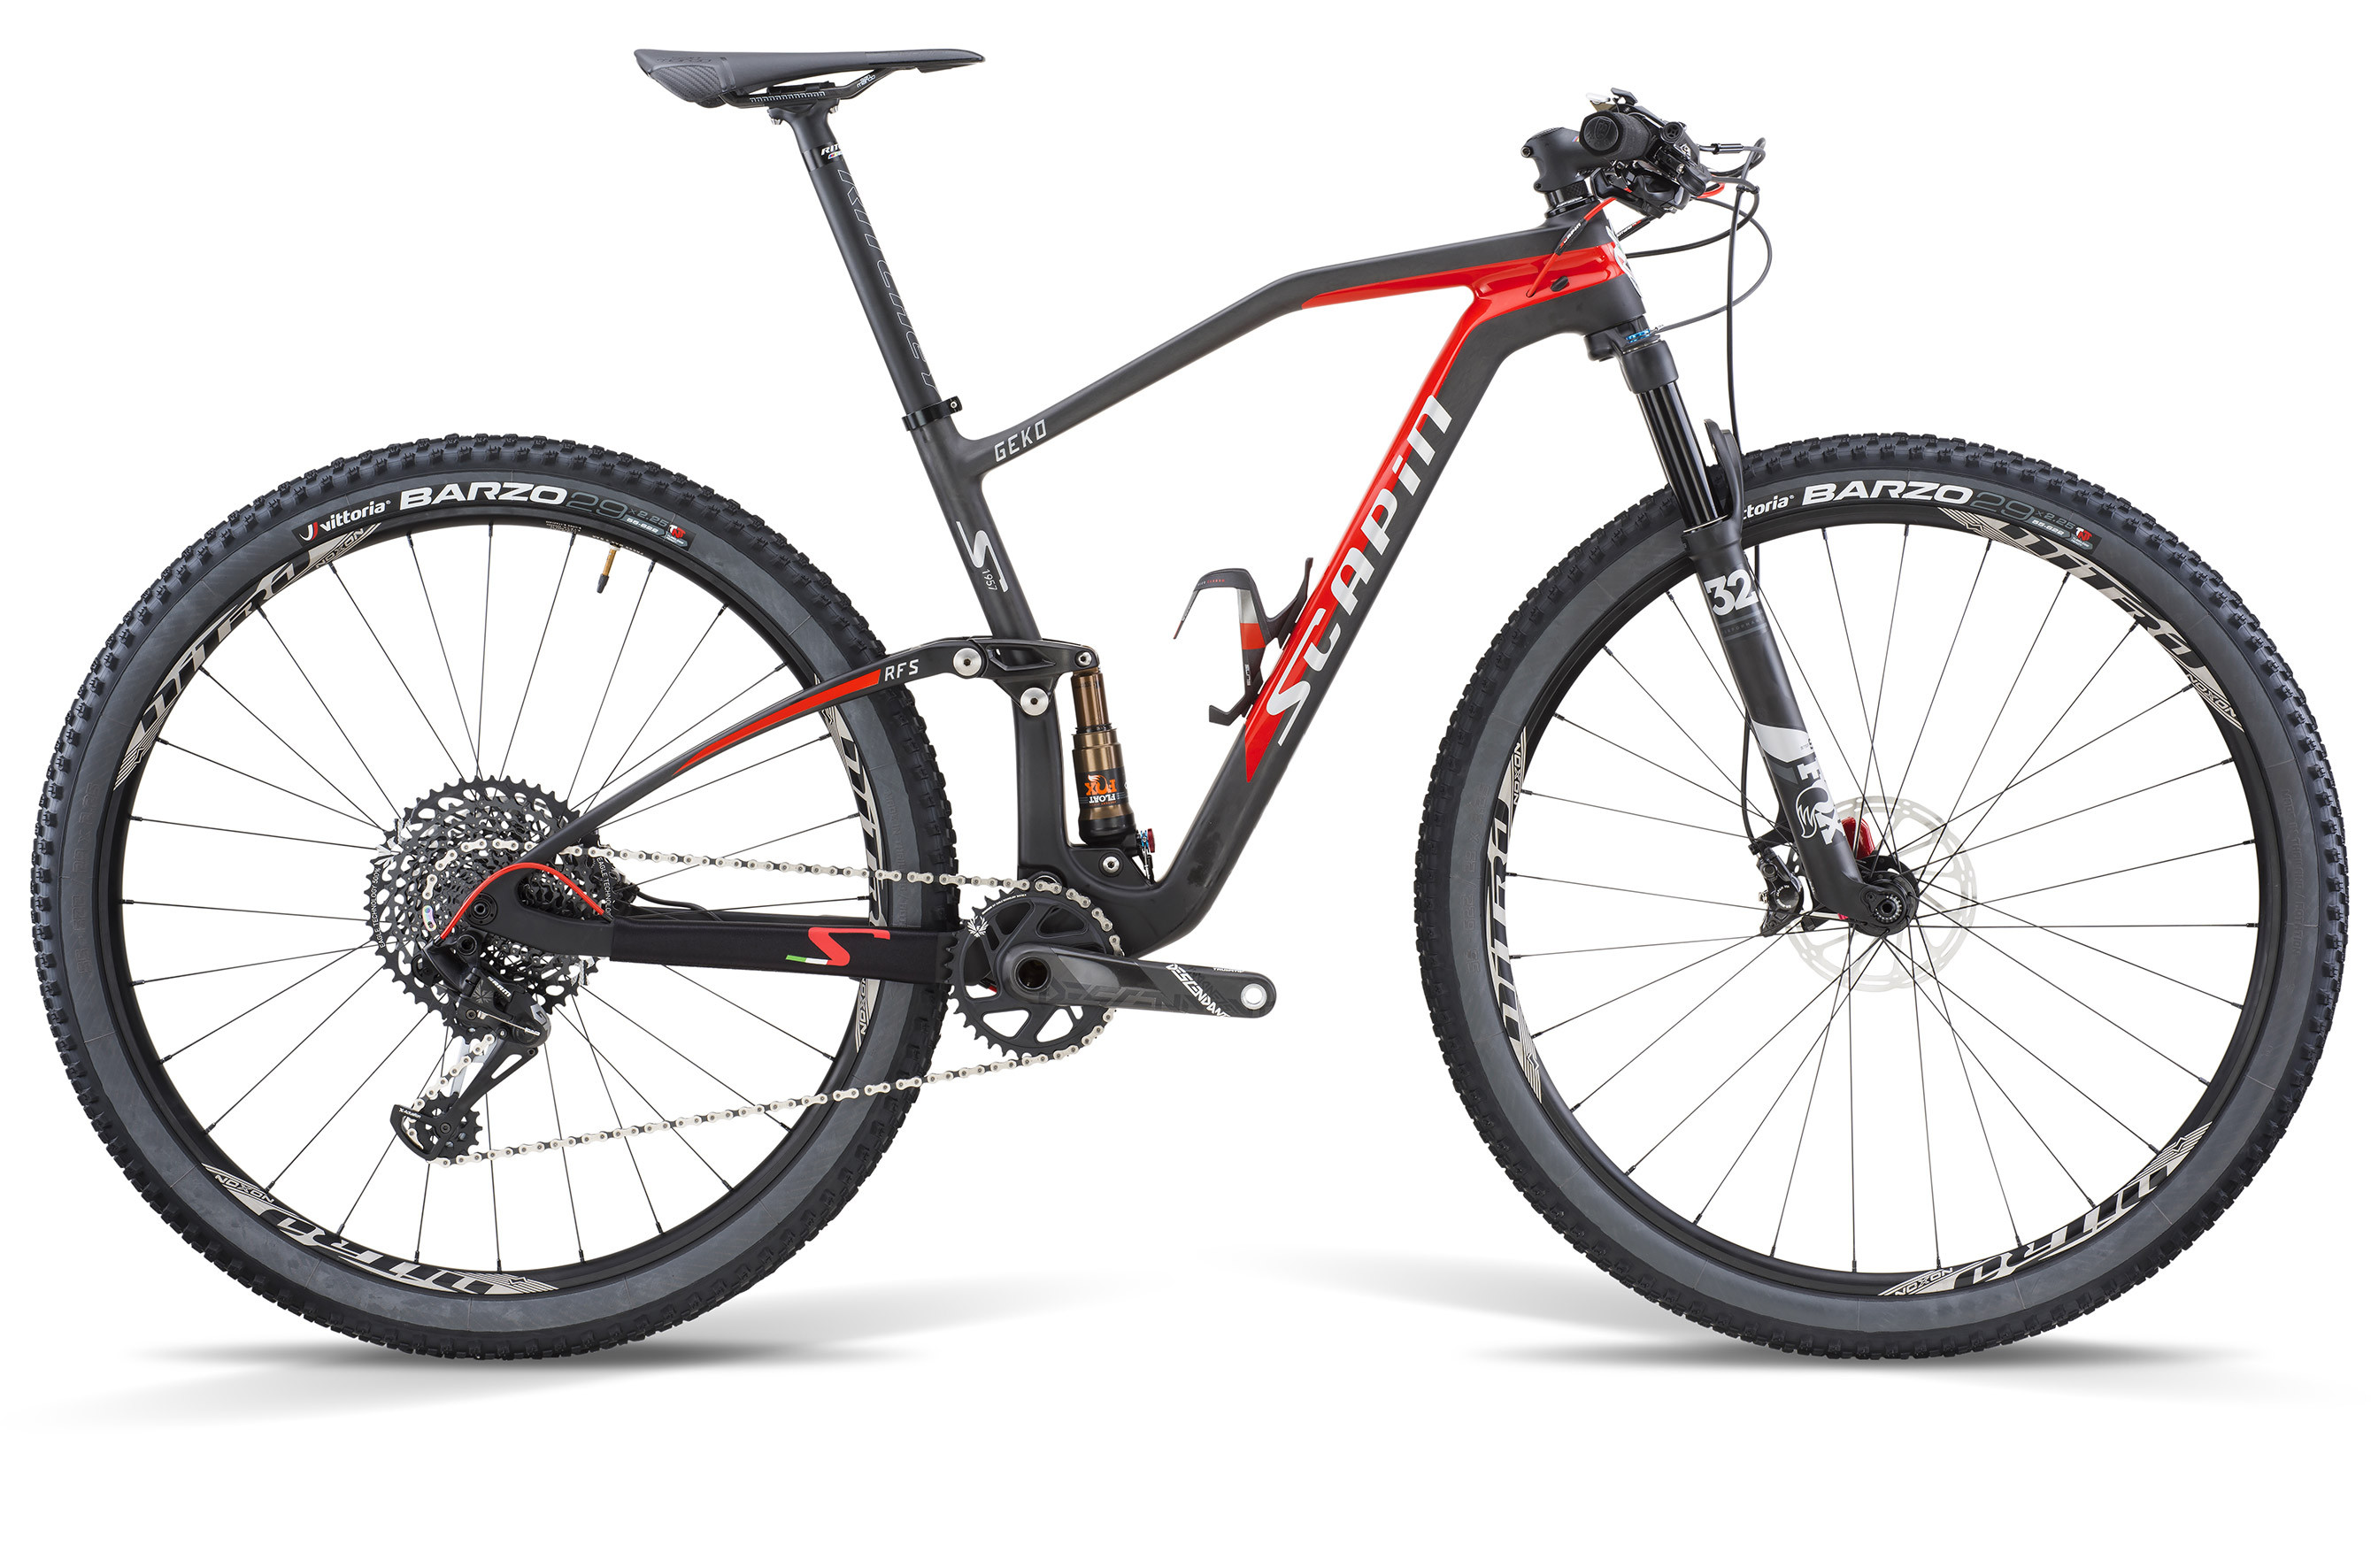 SCAPIN VTT COMPLET GEKO 29" CARBON - SHIMANO XT 12sp - FOX - Taille M Black/Red